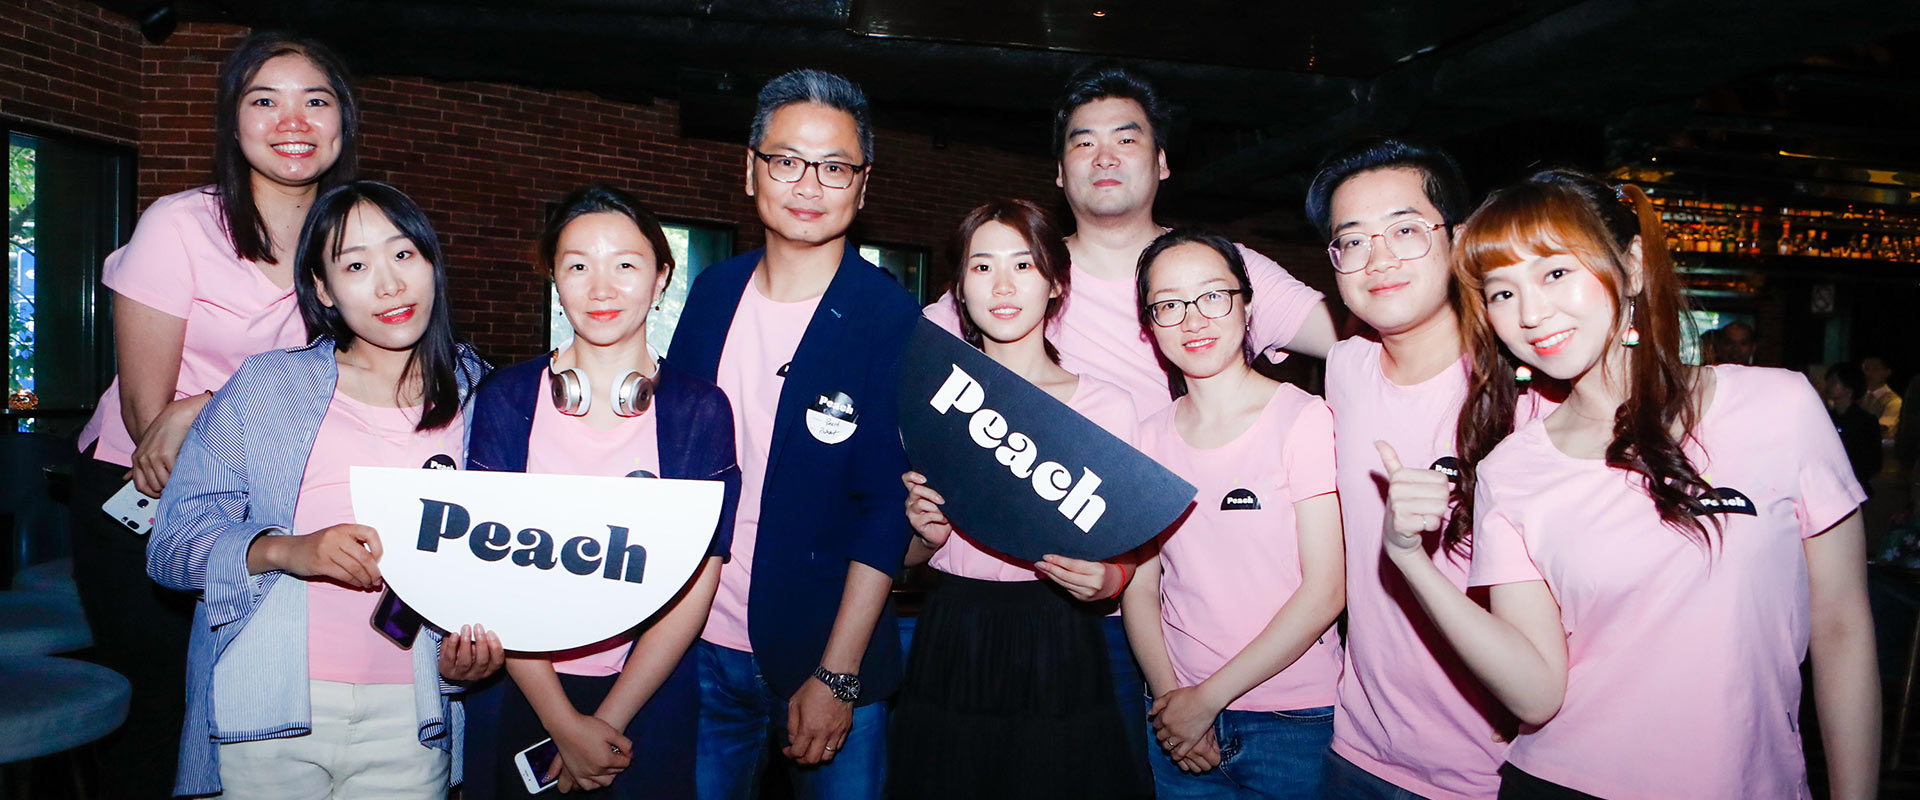 At the Peach party in Shanghai